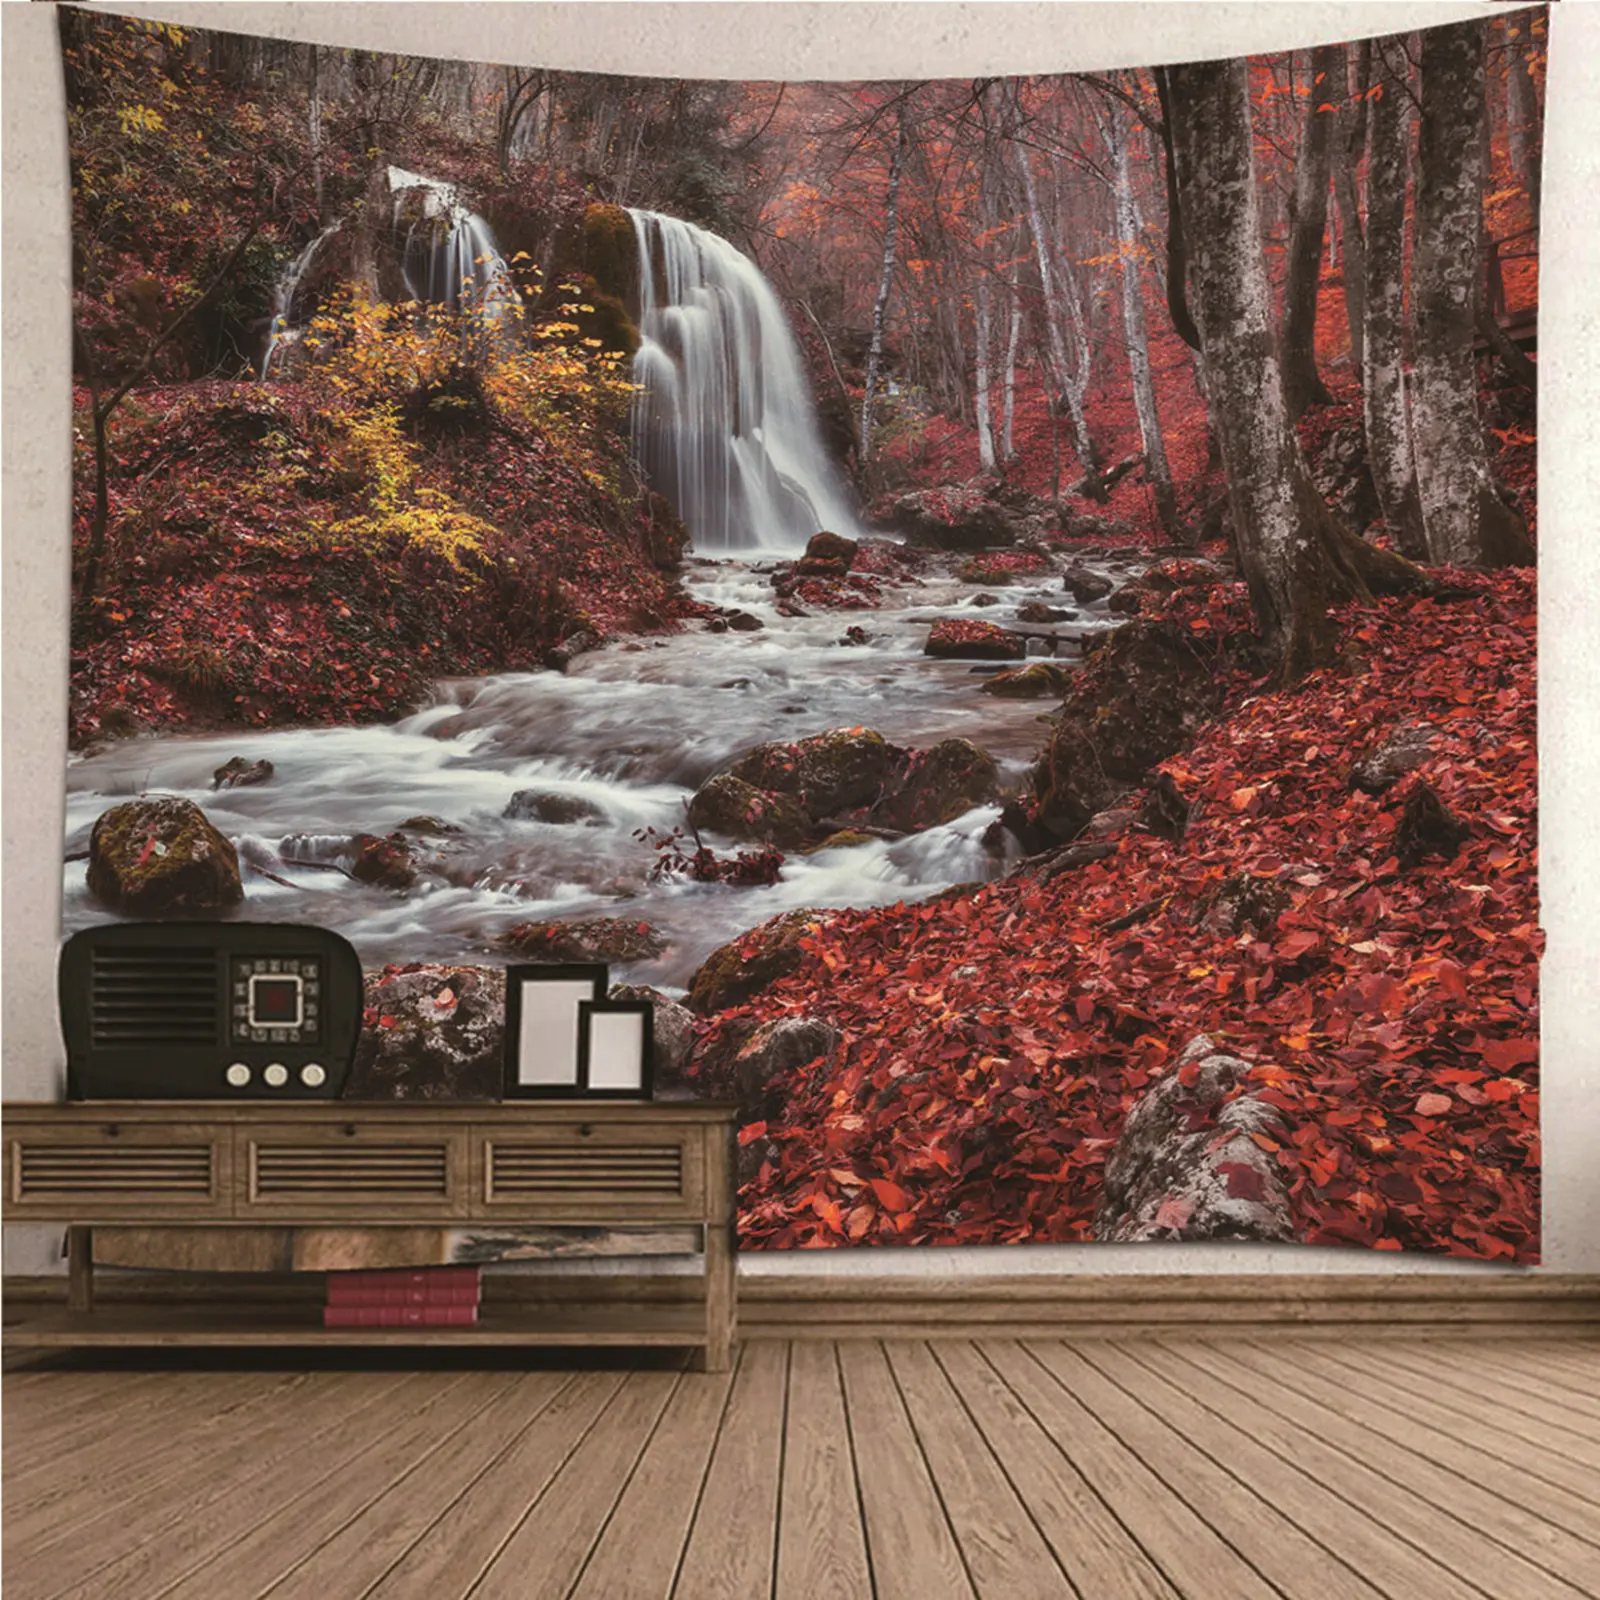 

Tapestry Pretty Small Tapestry Decor natural scenery Maple Forest Falls Creek Wall Hanging Blanket Dorm Art Decor Covering